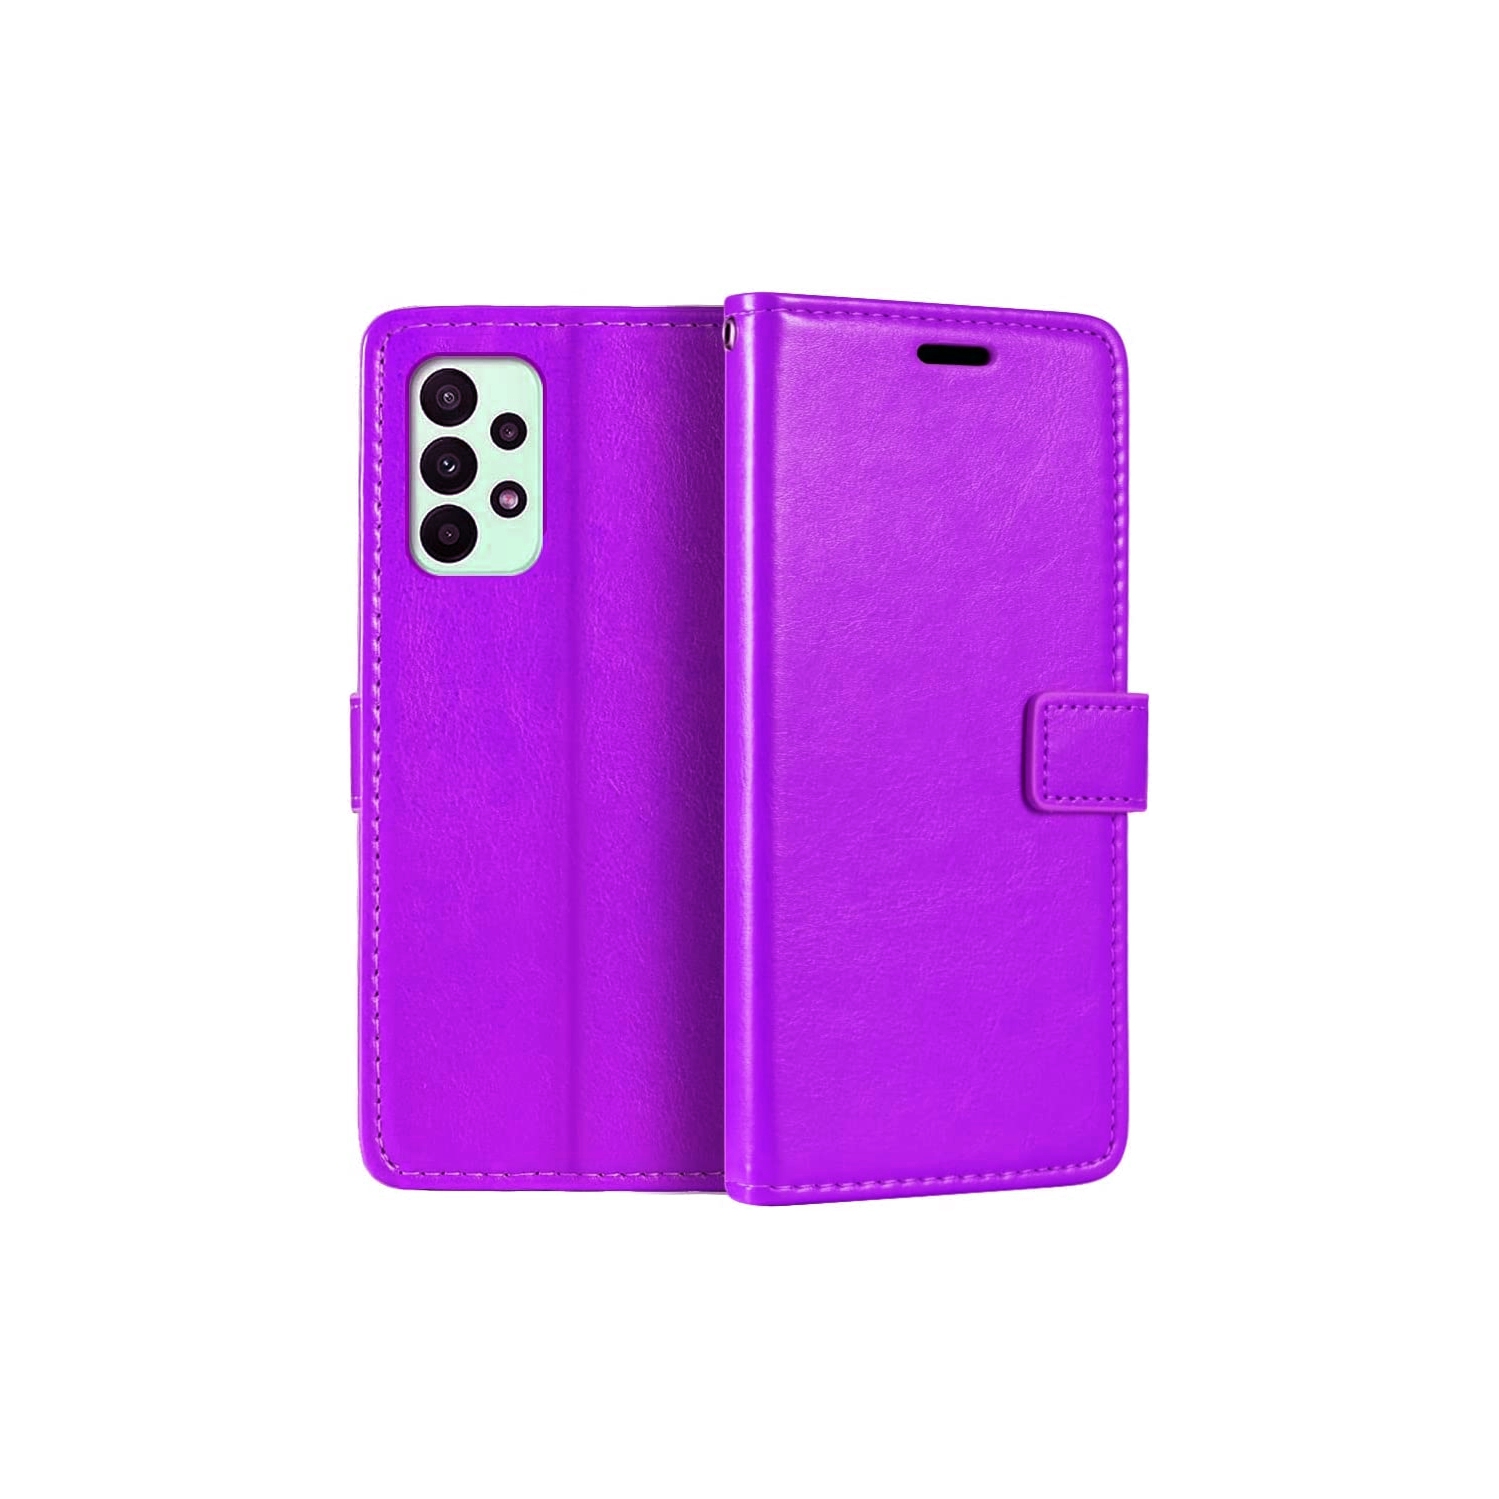 [CS] Samsung Galaxy A73 5G (2022) Case, Magnetic Leather Folio Wallet Flip Case Cover with Card Slot, Purple